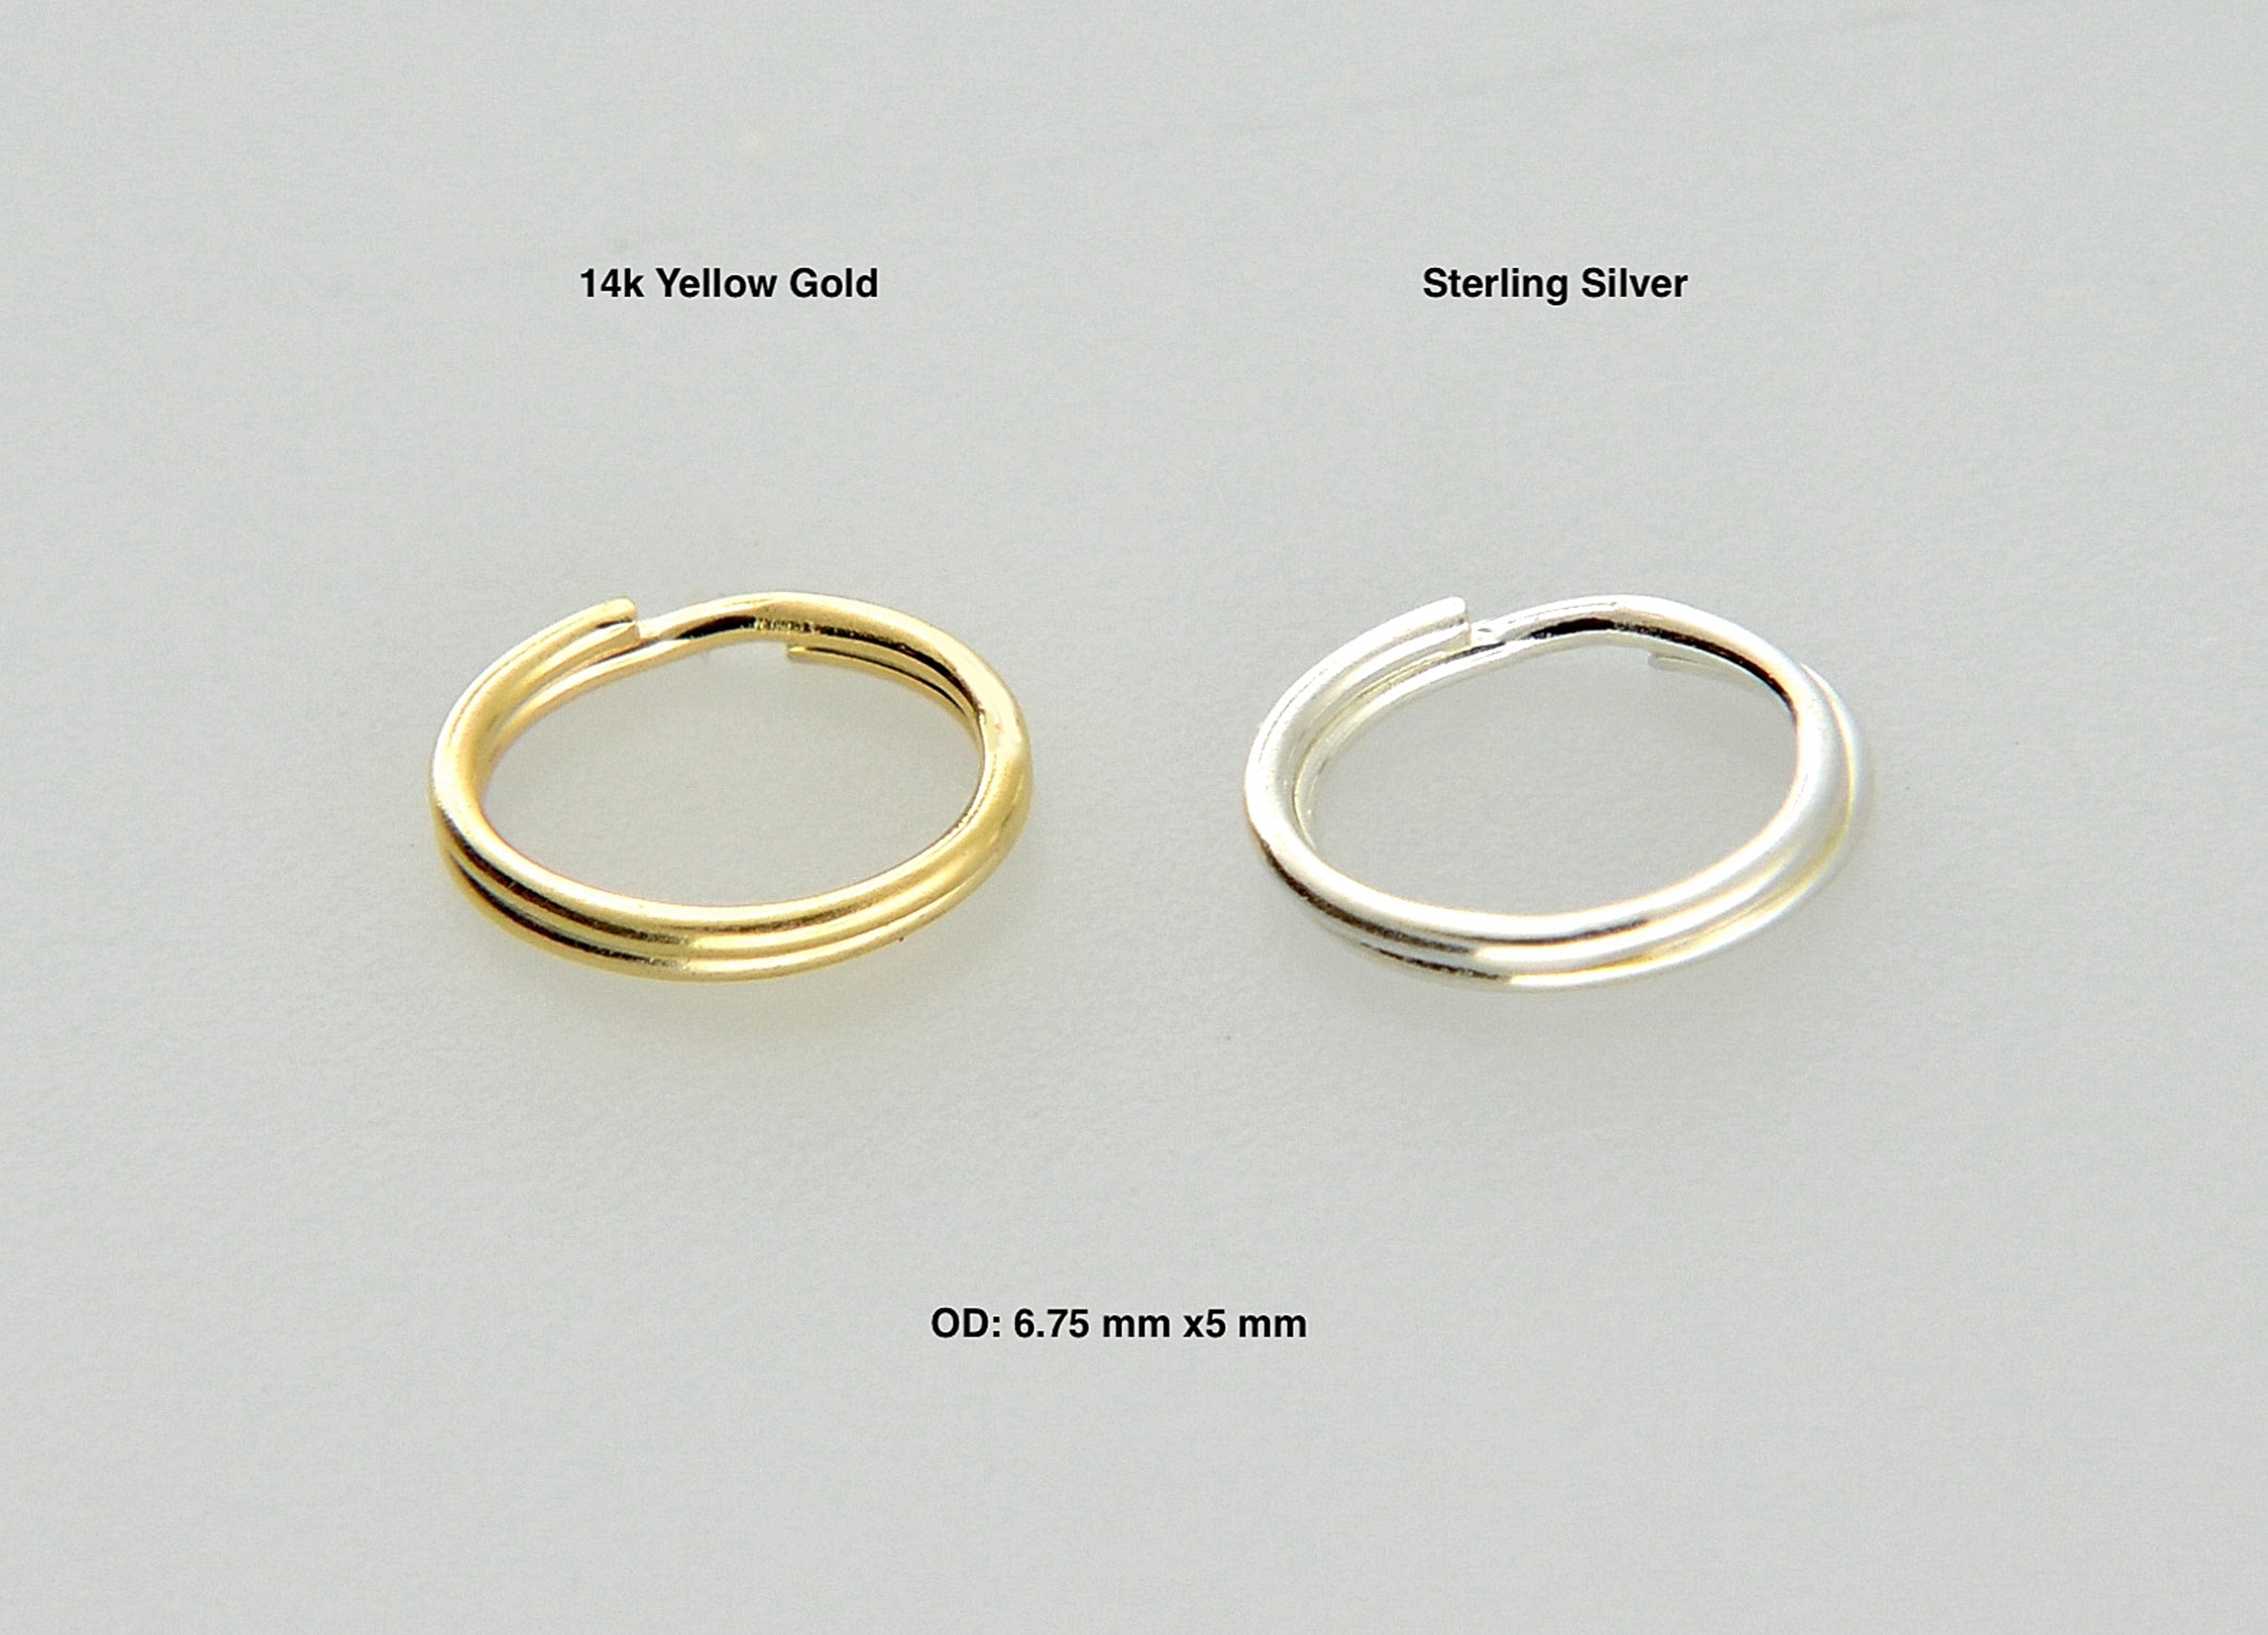 14k Yellow Gold or Sterling Silver Oval Split Ring 6.75mm x 5mm OD Outside Diameter 1mm Thick Jewelry Findings